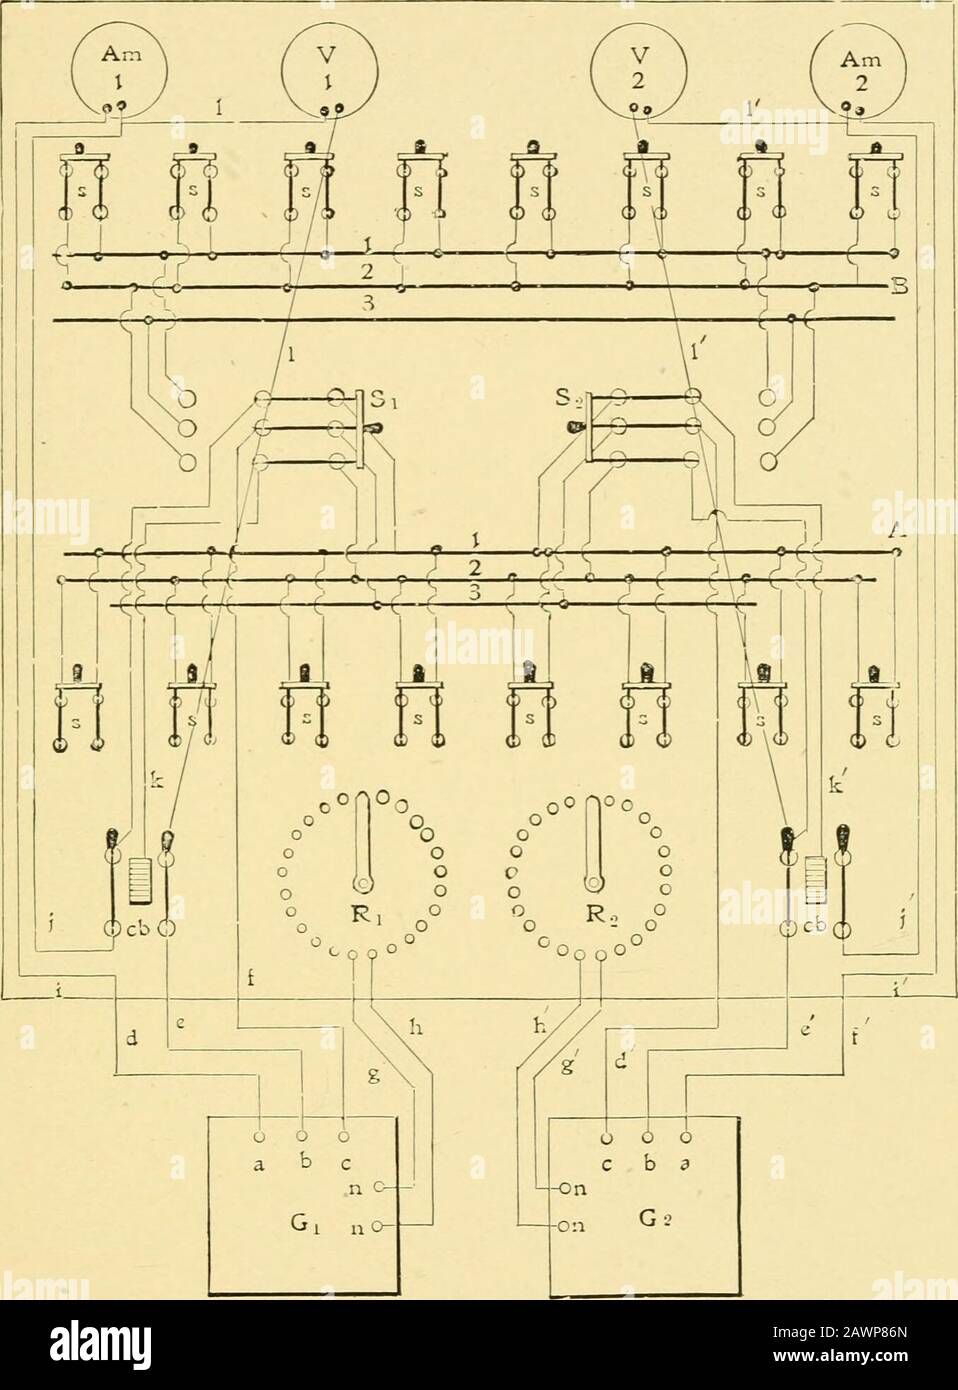 Switchboards for power, light and railway service, direct and alternating current, high and low tension . f that figure,that is, a switch to connect the two sets of busses. Ifeach generator is connected with a separate set of busses,we can run them at different voltages, but if both feedinto the same set as represented in the diagram, the voltagemust be equalized. Therefore, unless the two voltmetersindicate the same pressure, the generators cannot be con-nected with the same set of busses. In starting up two generators, connected in parallel, thecourse of procedure is to set the machines in m Stock Photo